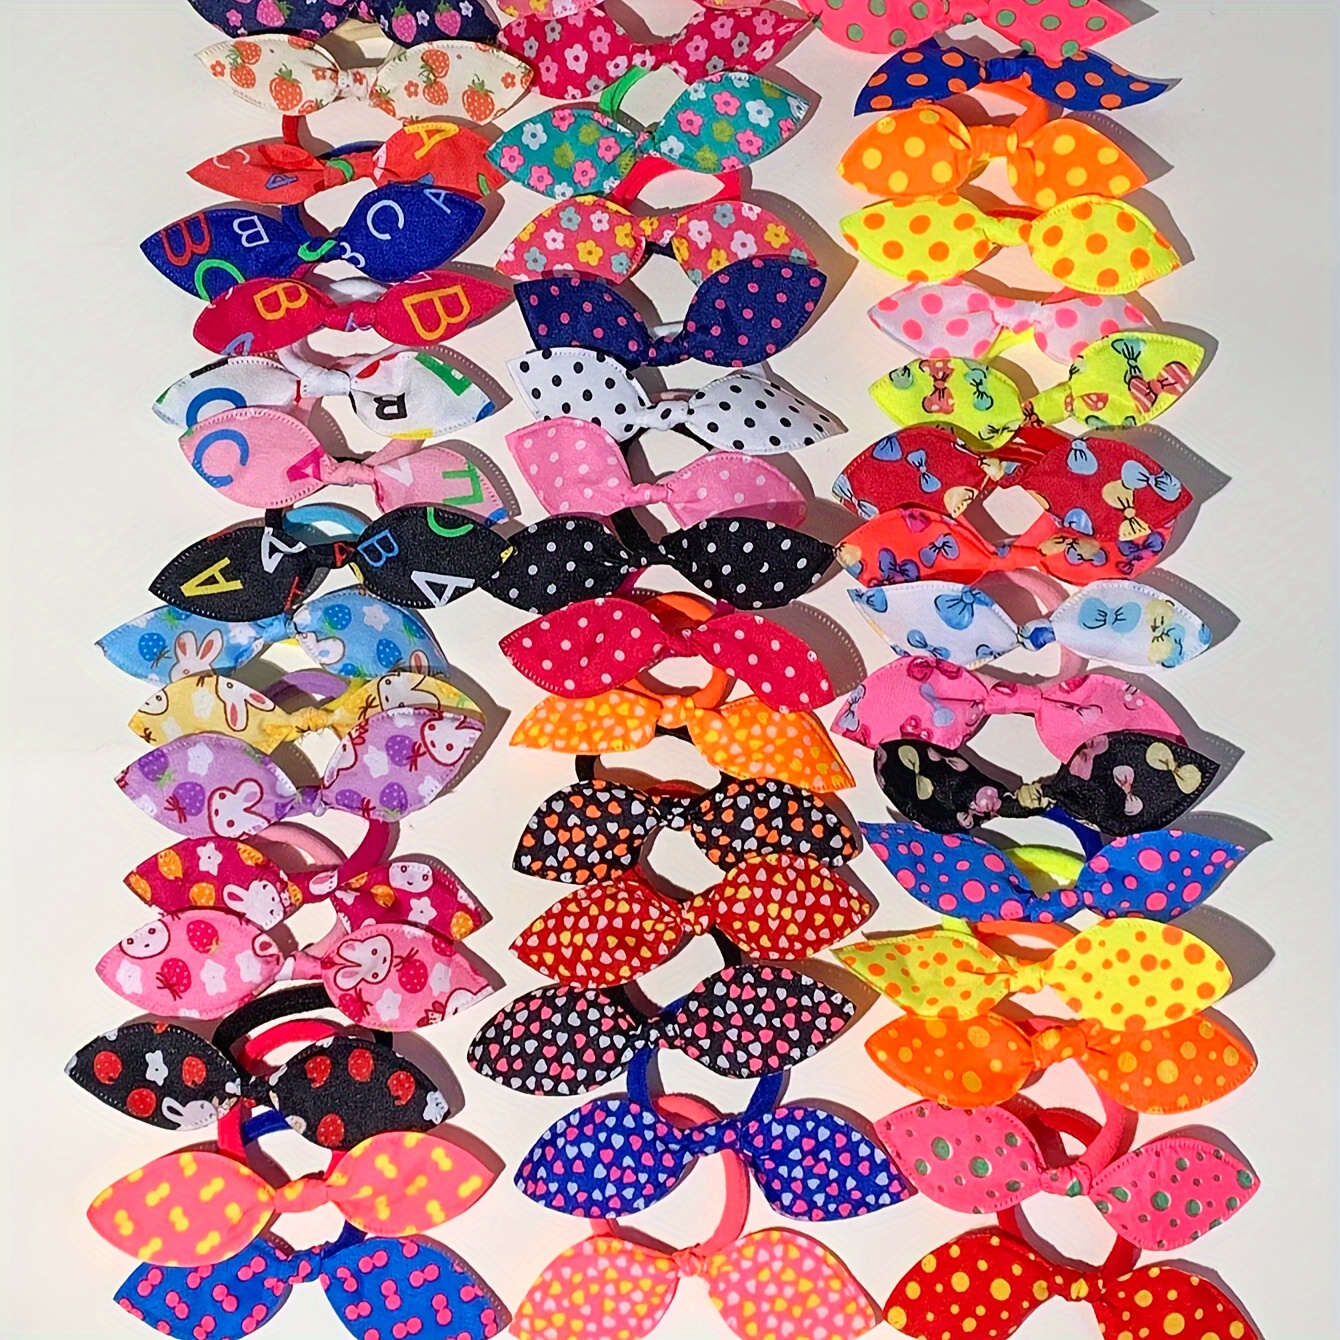 

50-piece Vintage Bow Hair Bands For Girls - Colorful Elastic Ponytail Holders, Cute & Durable